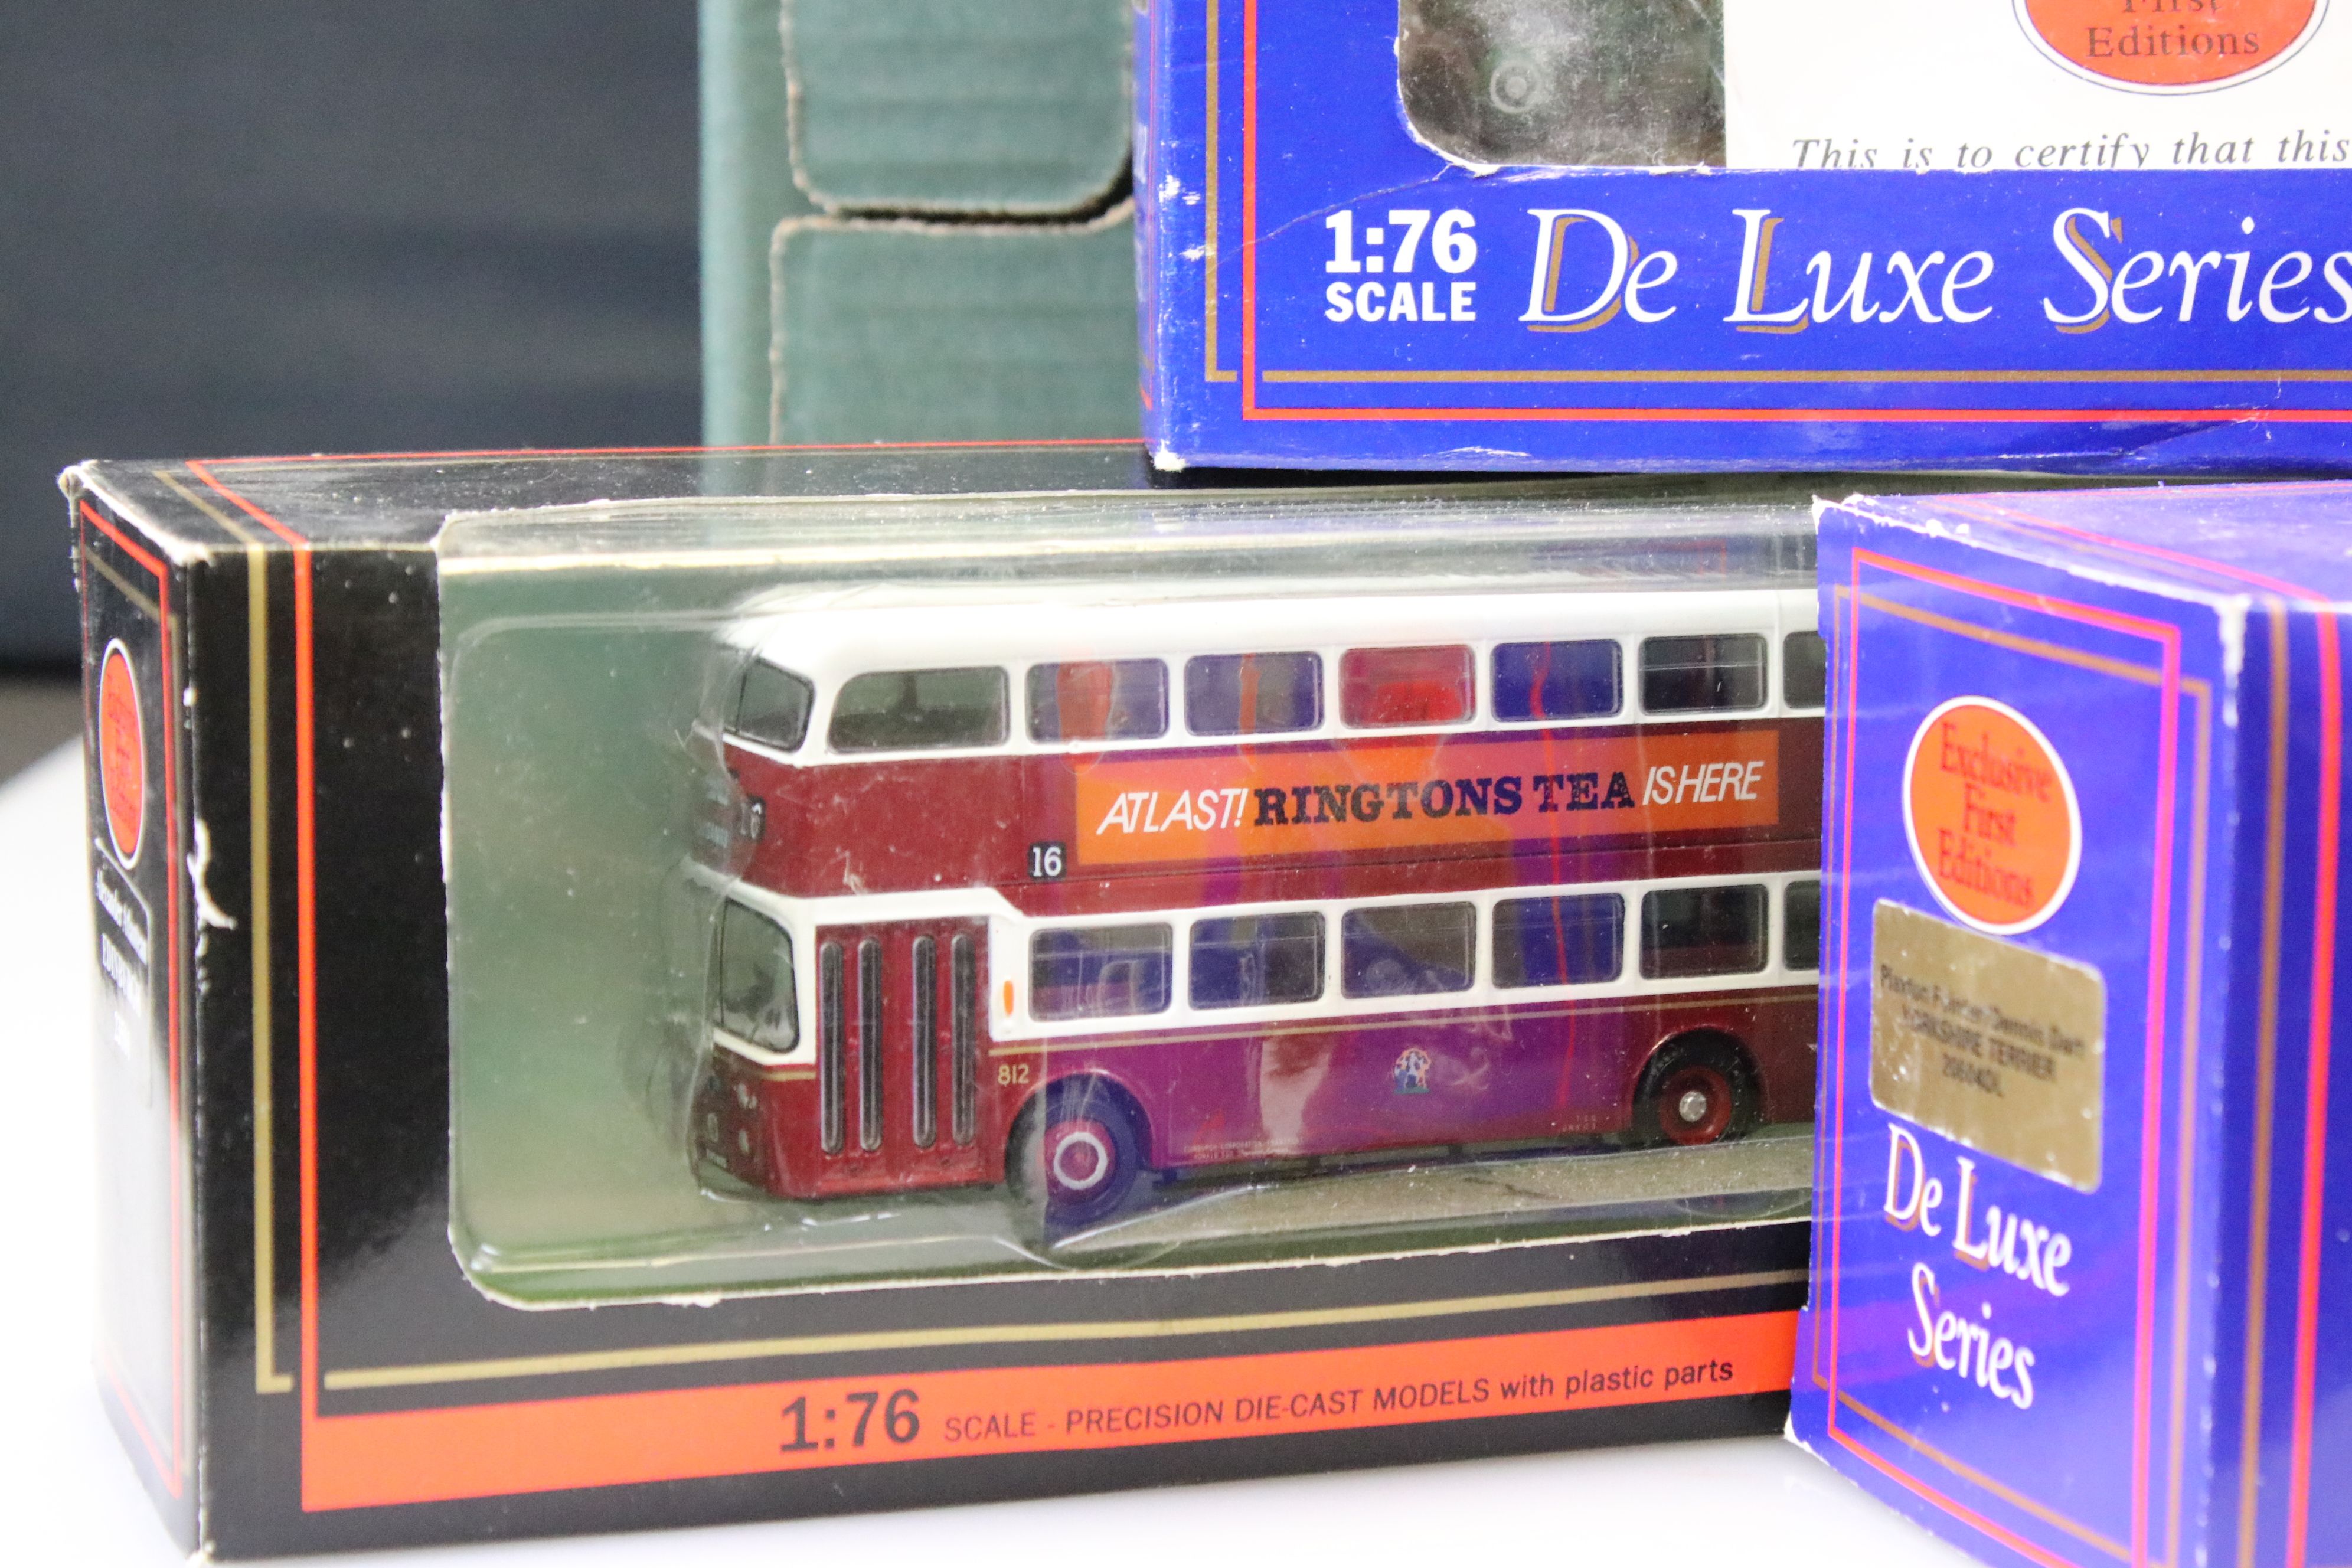 26 Boxed EFE Exclusive First Editions diecast model buses, 1:76 scale, featuring, 5 x De Luxe Series - Image 3 of 7